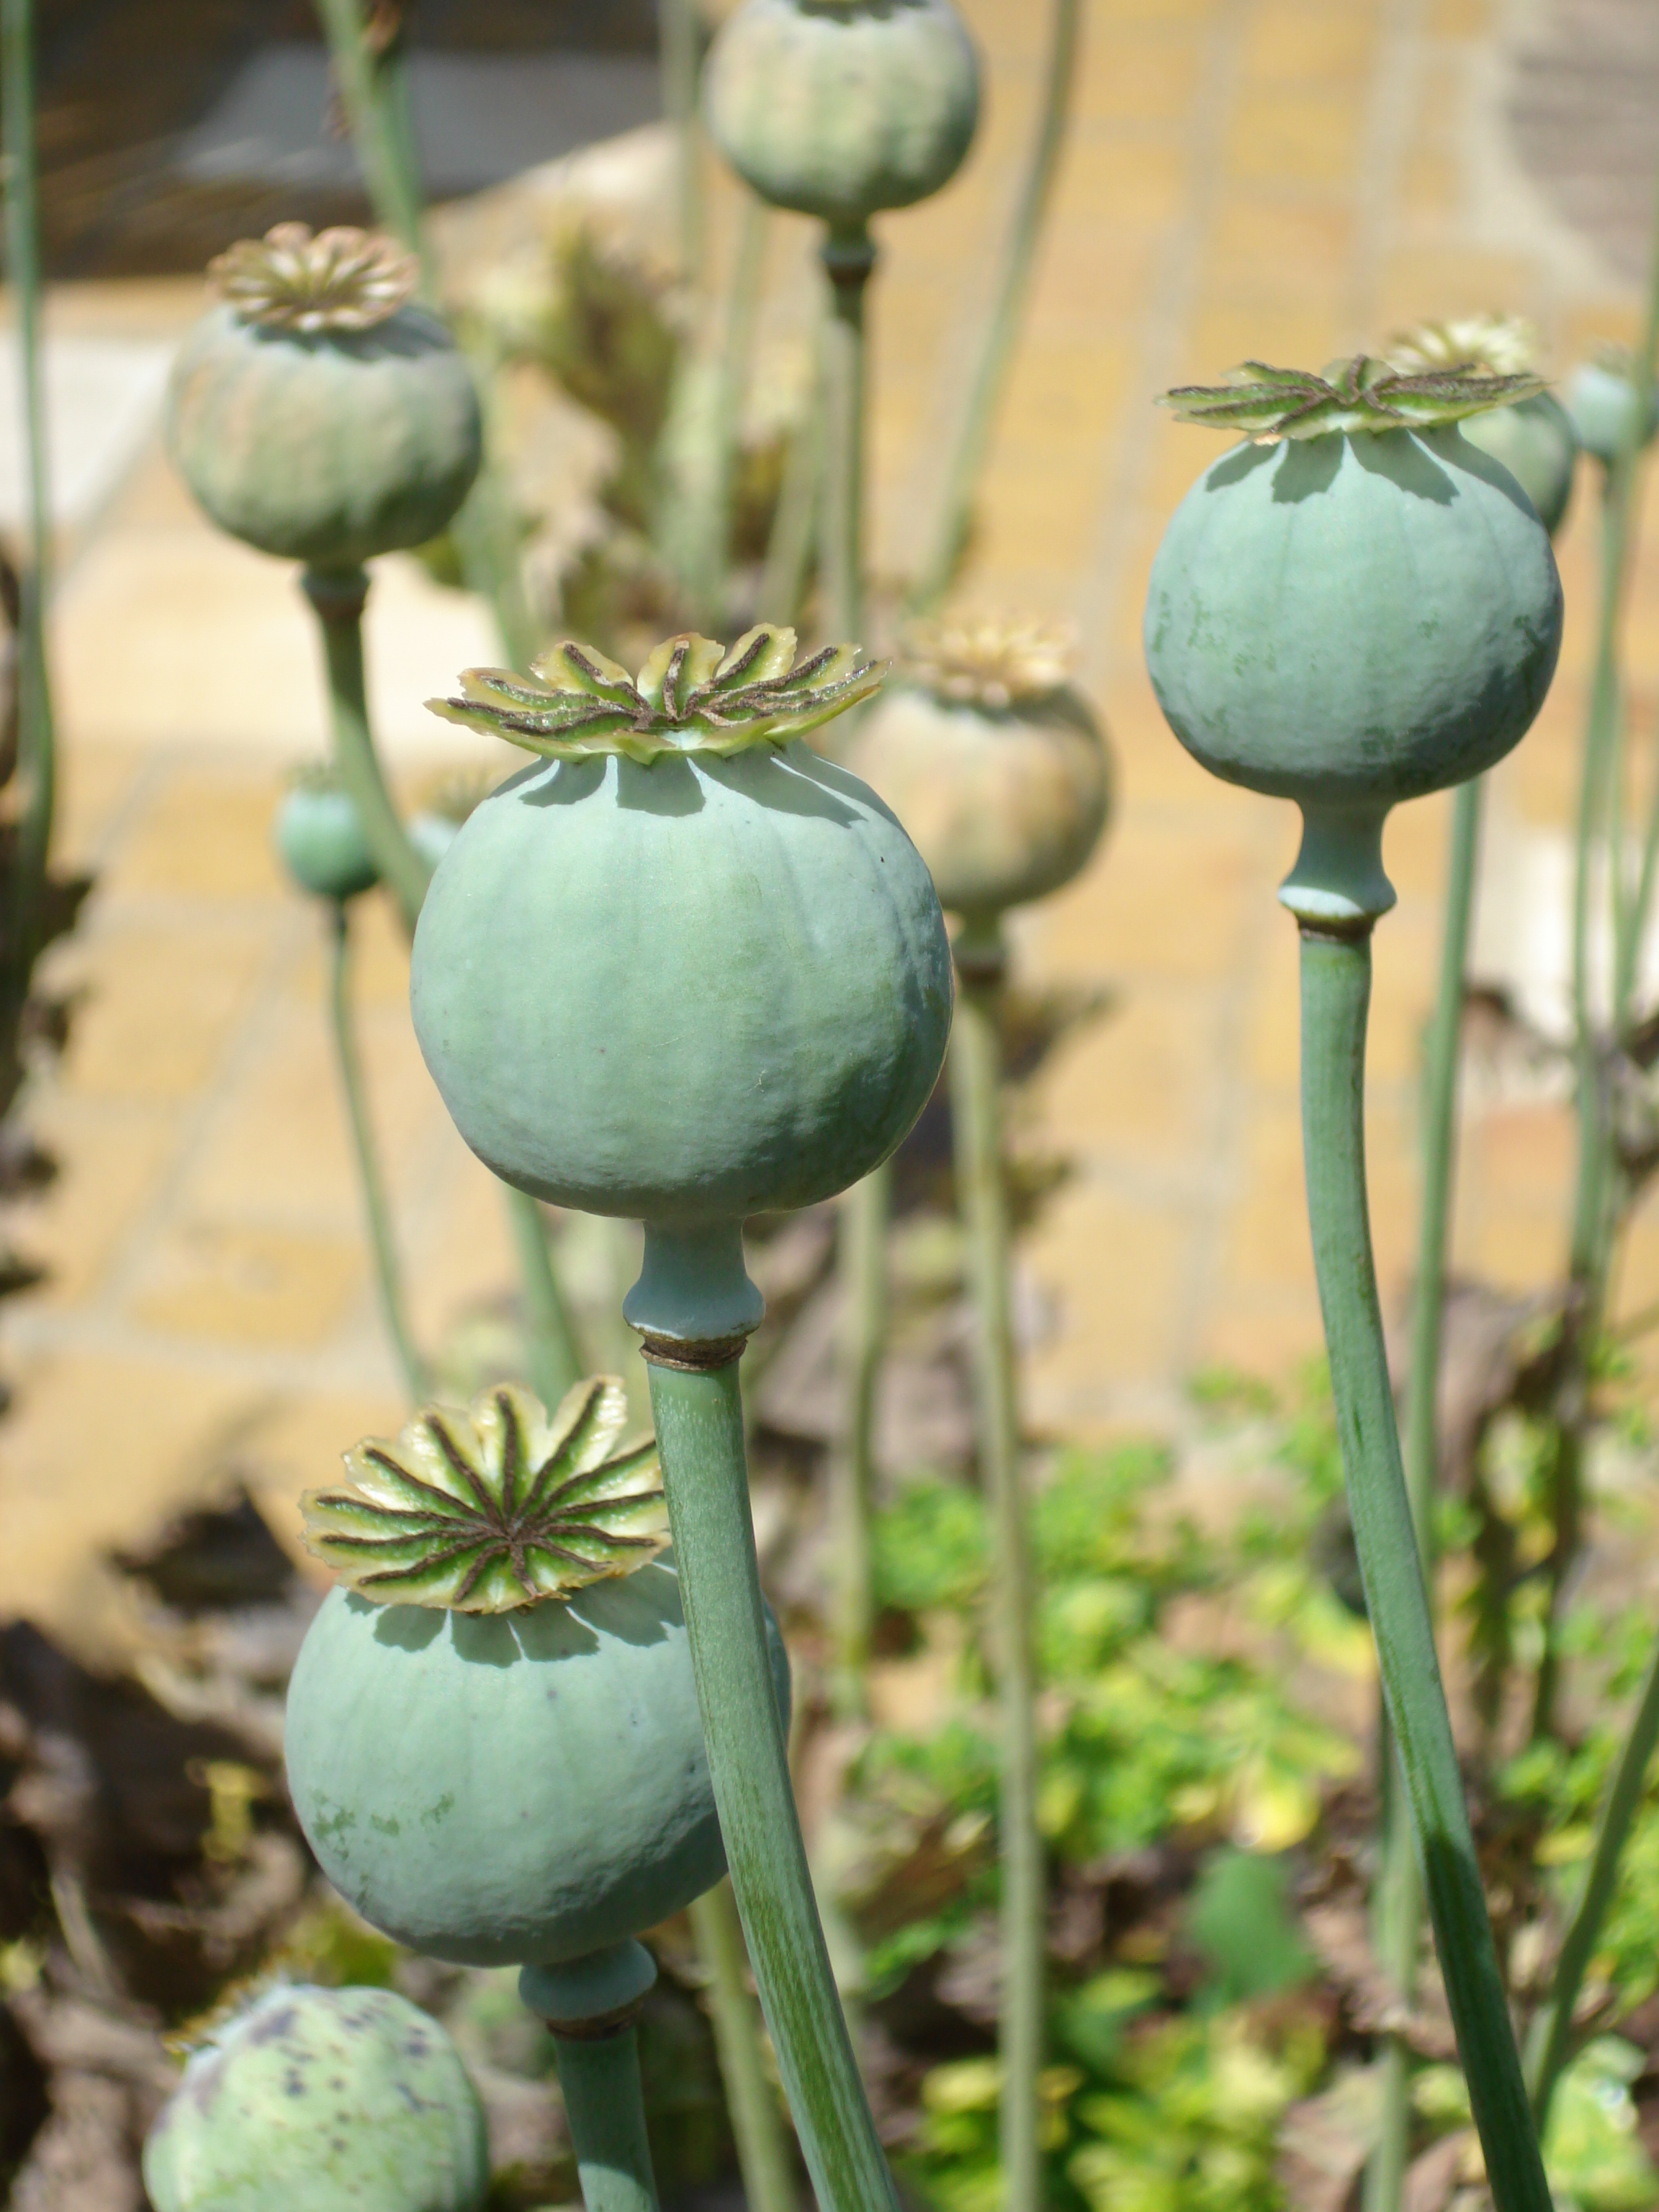 Naturally self-seeding poppies have stunning seed heads after flowering